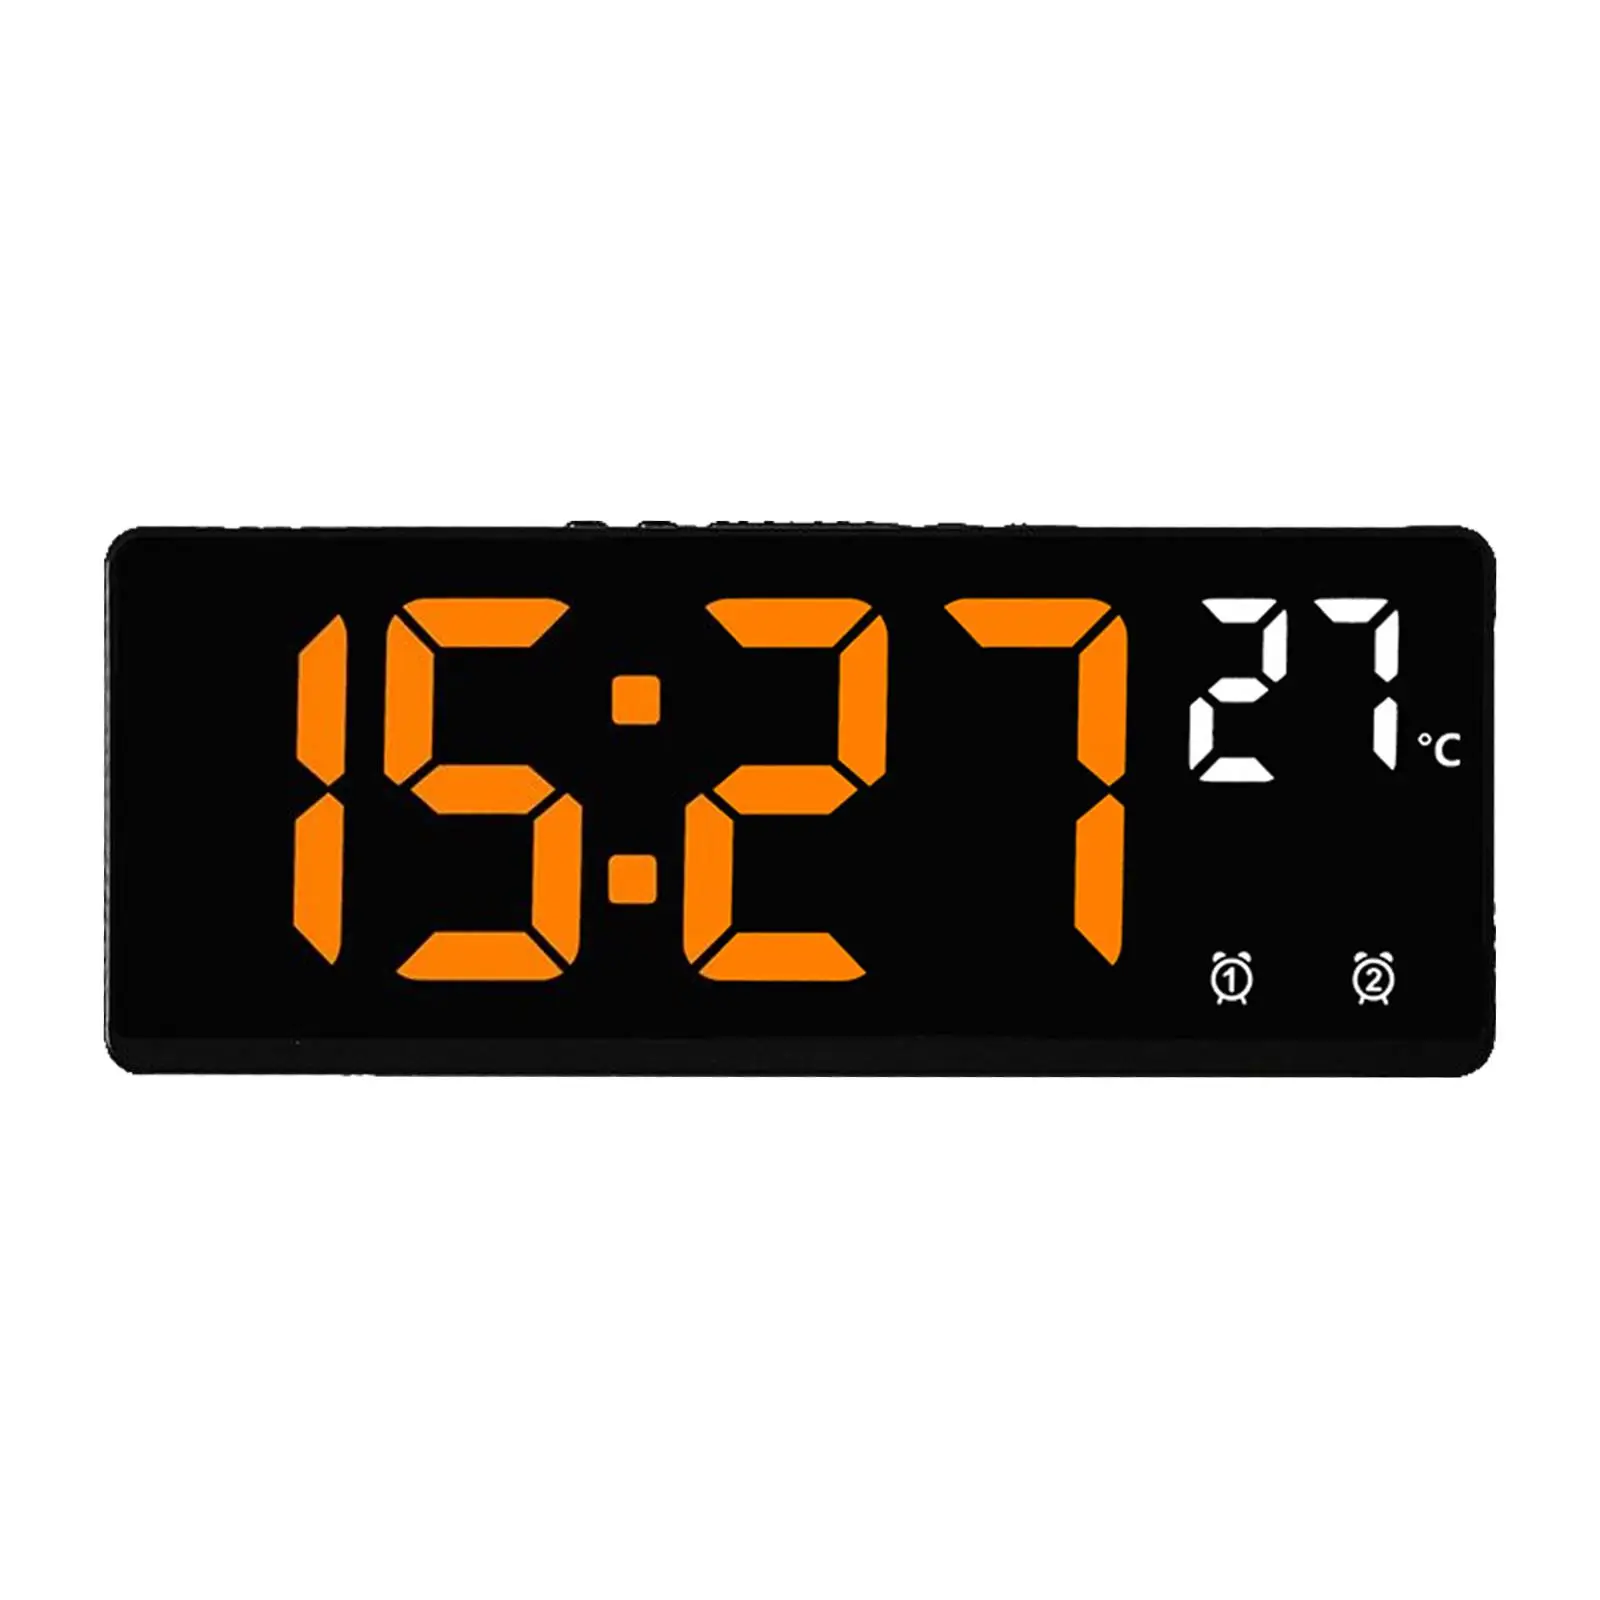 Digital Alarm Clock Simple Dimmable Large Display for Office Bedroom